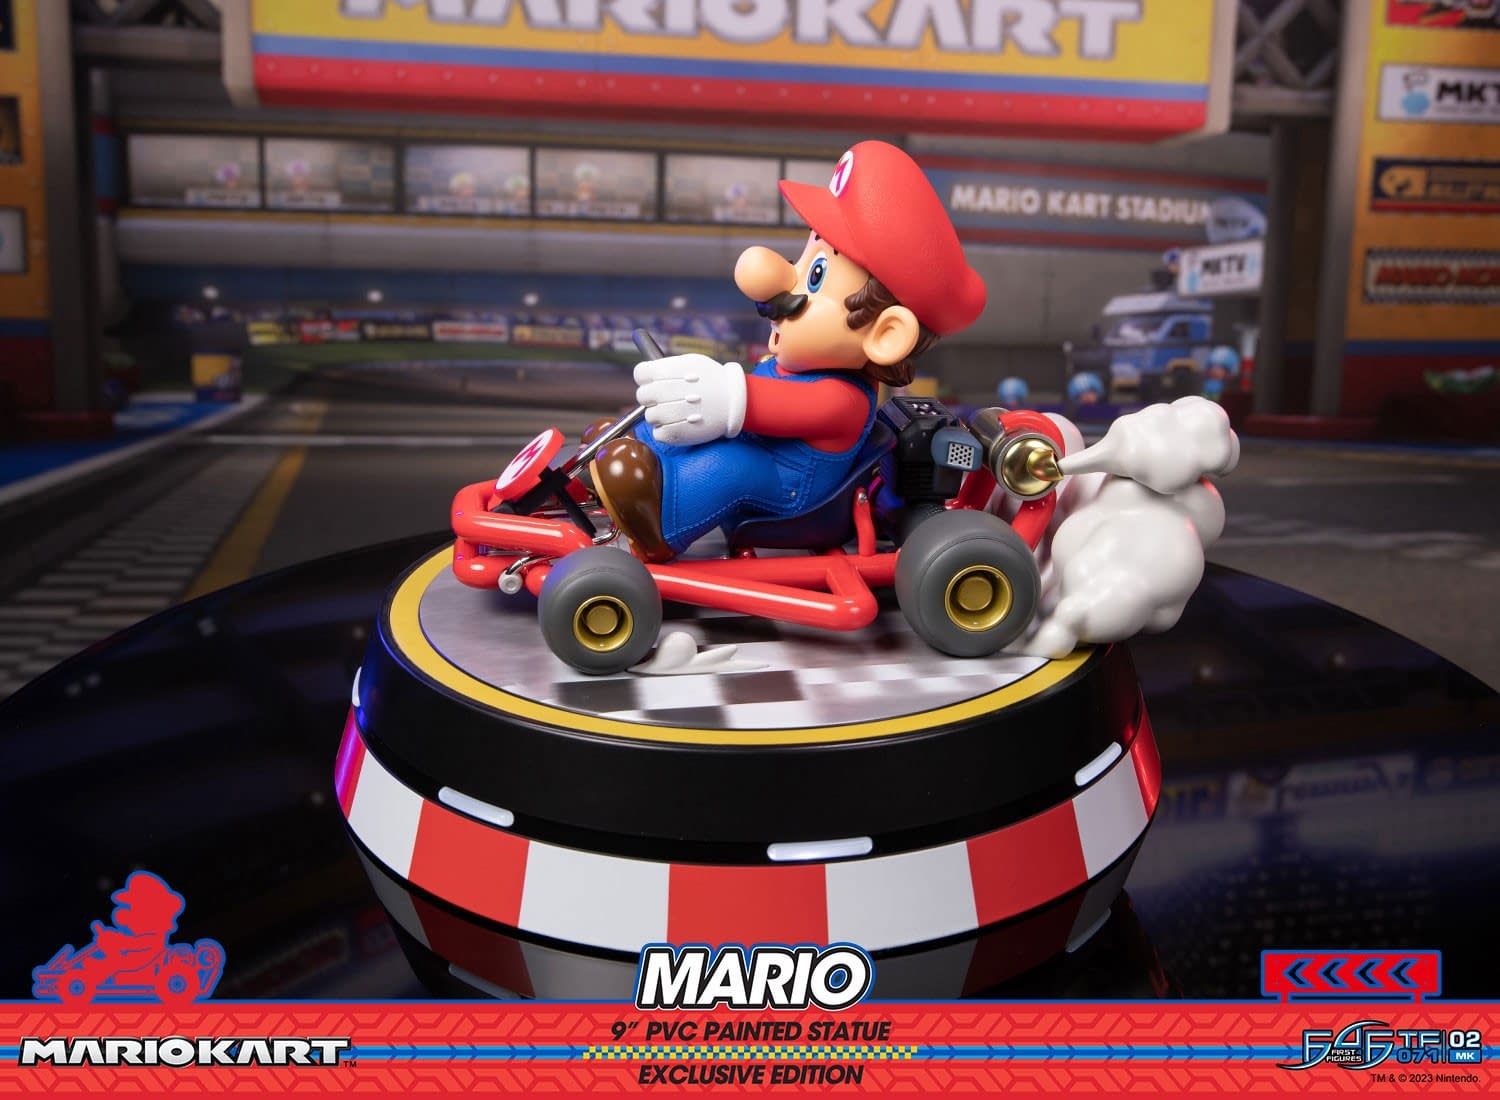 Bring Home First Place with First 4 Figures New Mario Kart Statue 